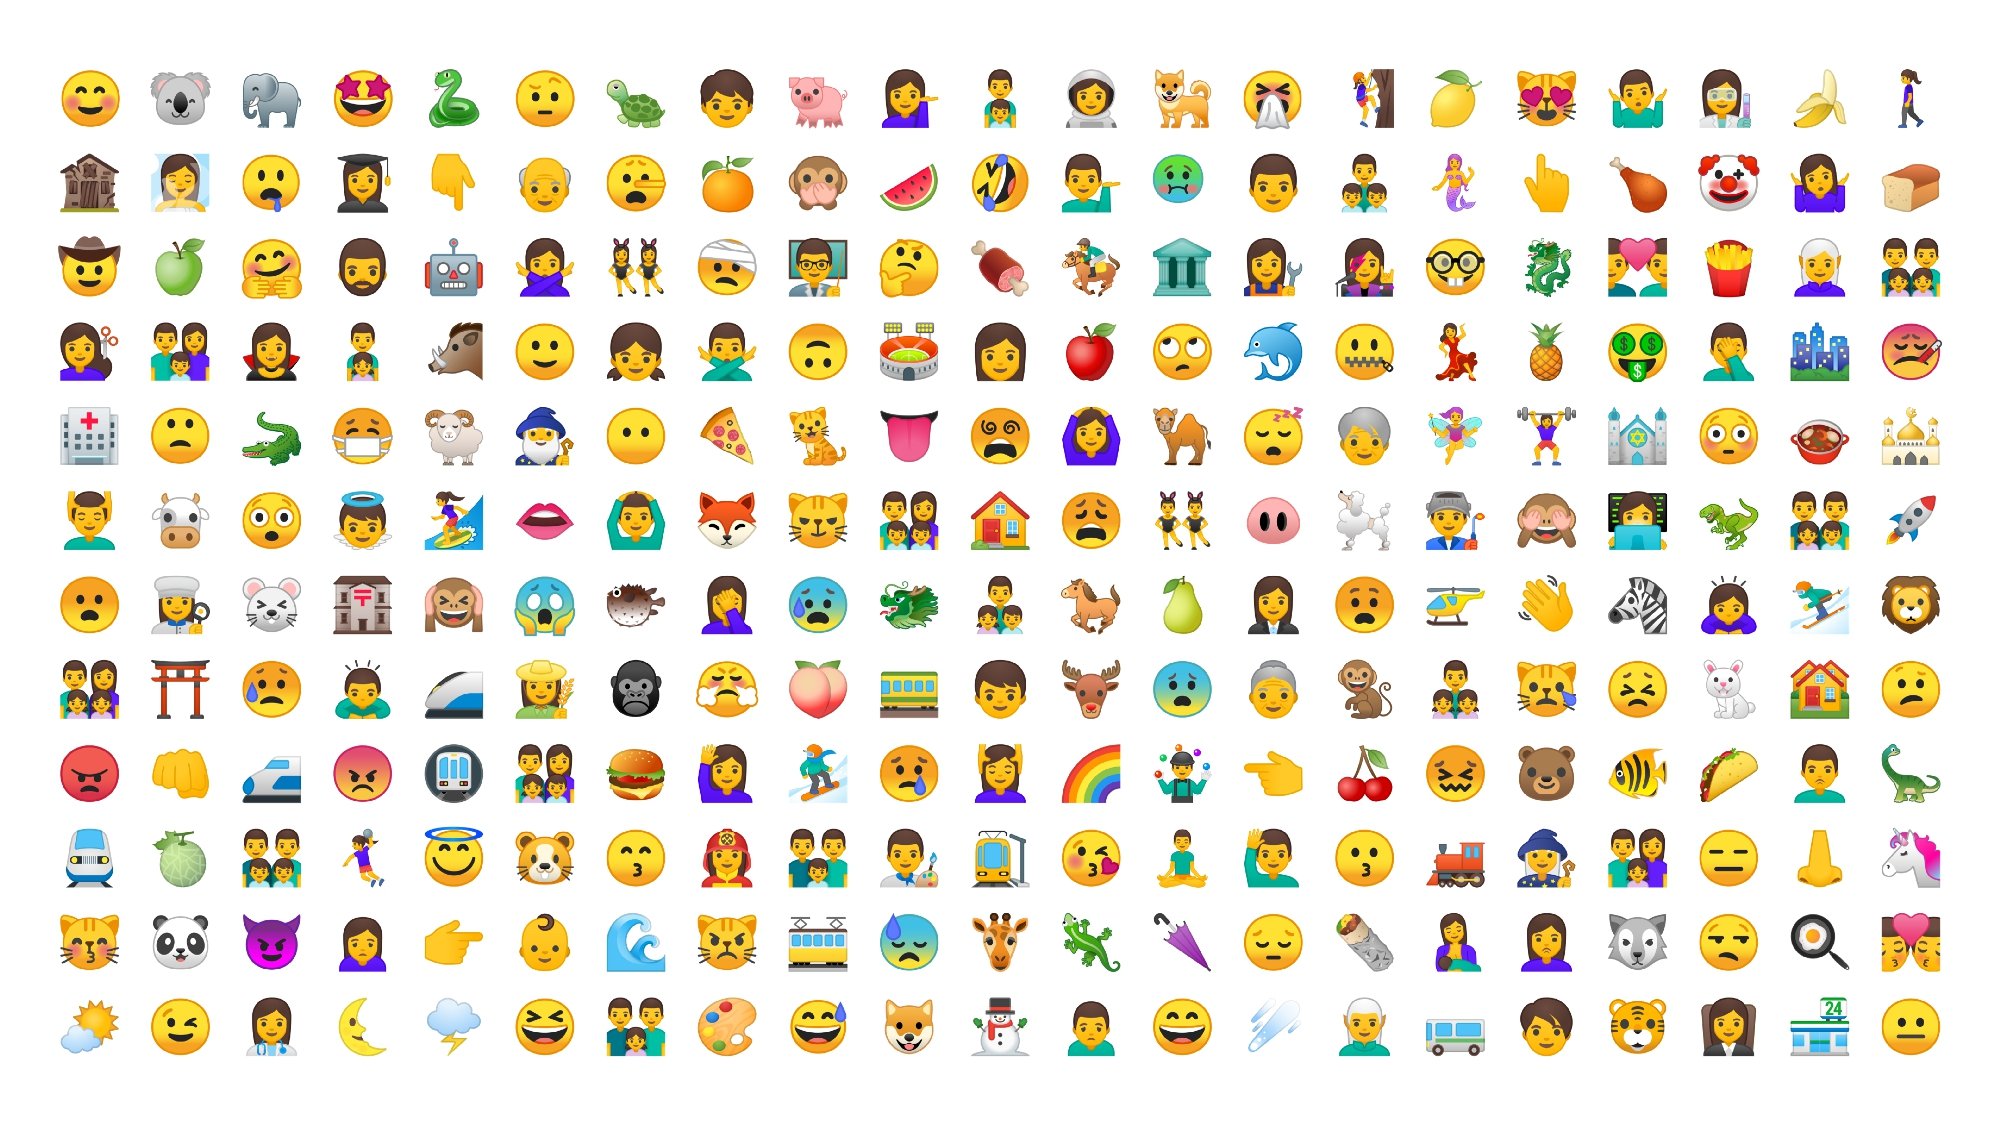  A screenshot of the Google Phone emoji picker, which includes a search bar at the top and a grid of emoji below.